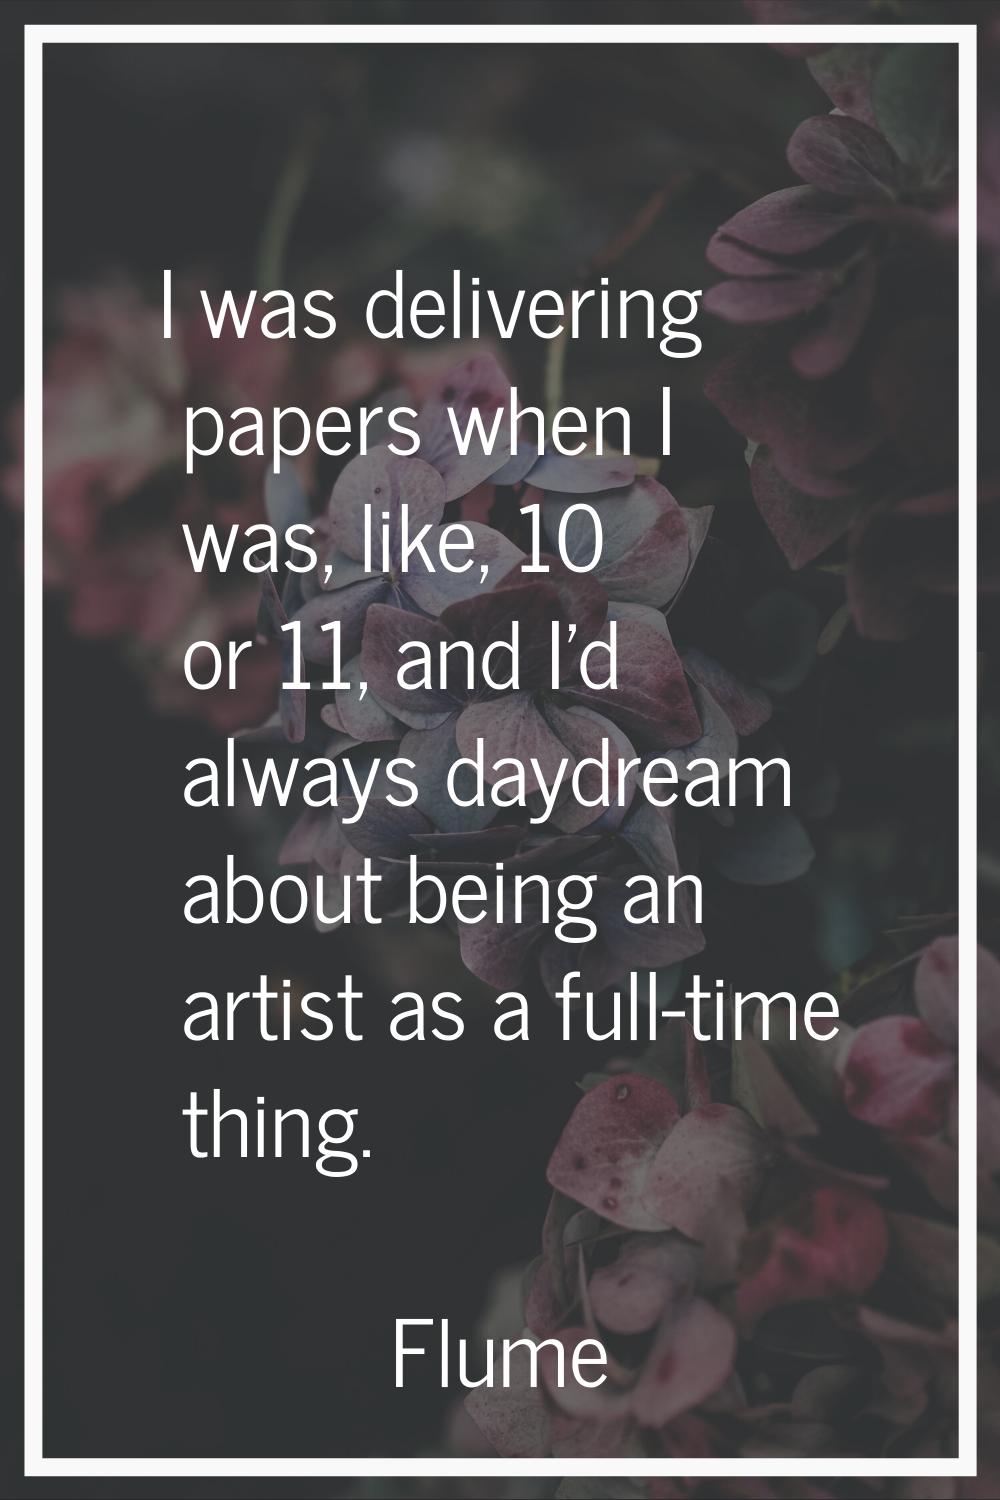 I was delivering papers when I was, like, 10 or 11, and I'd always daydream about being an artist a